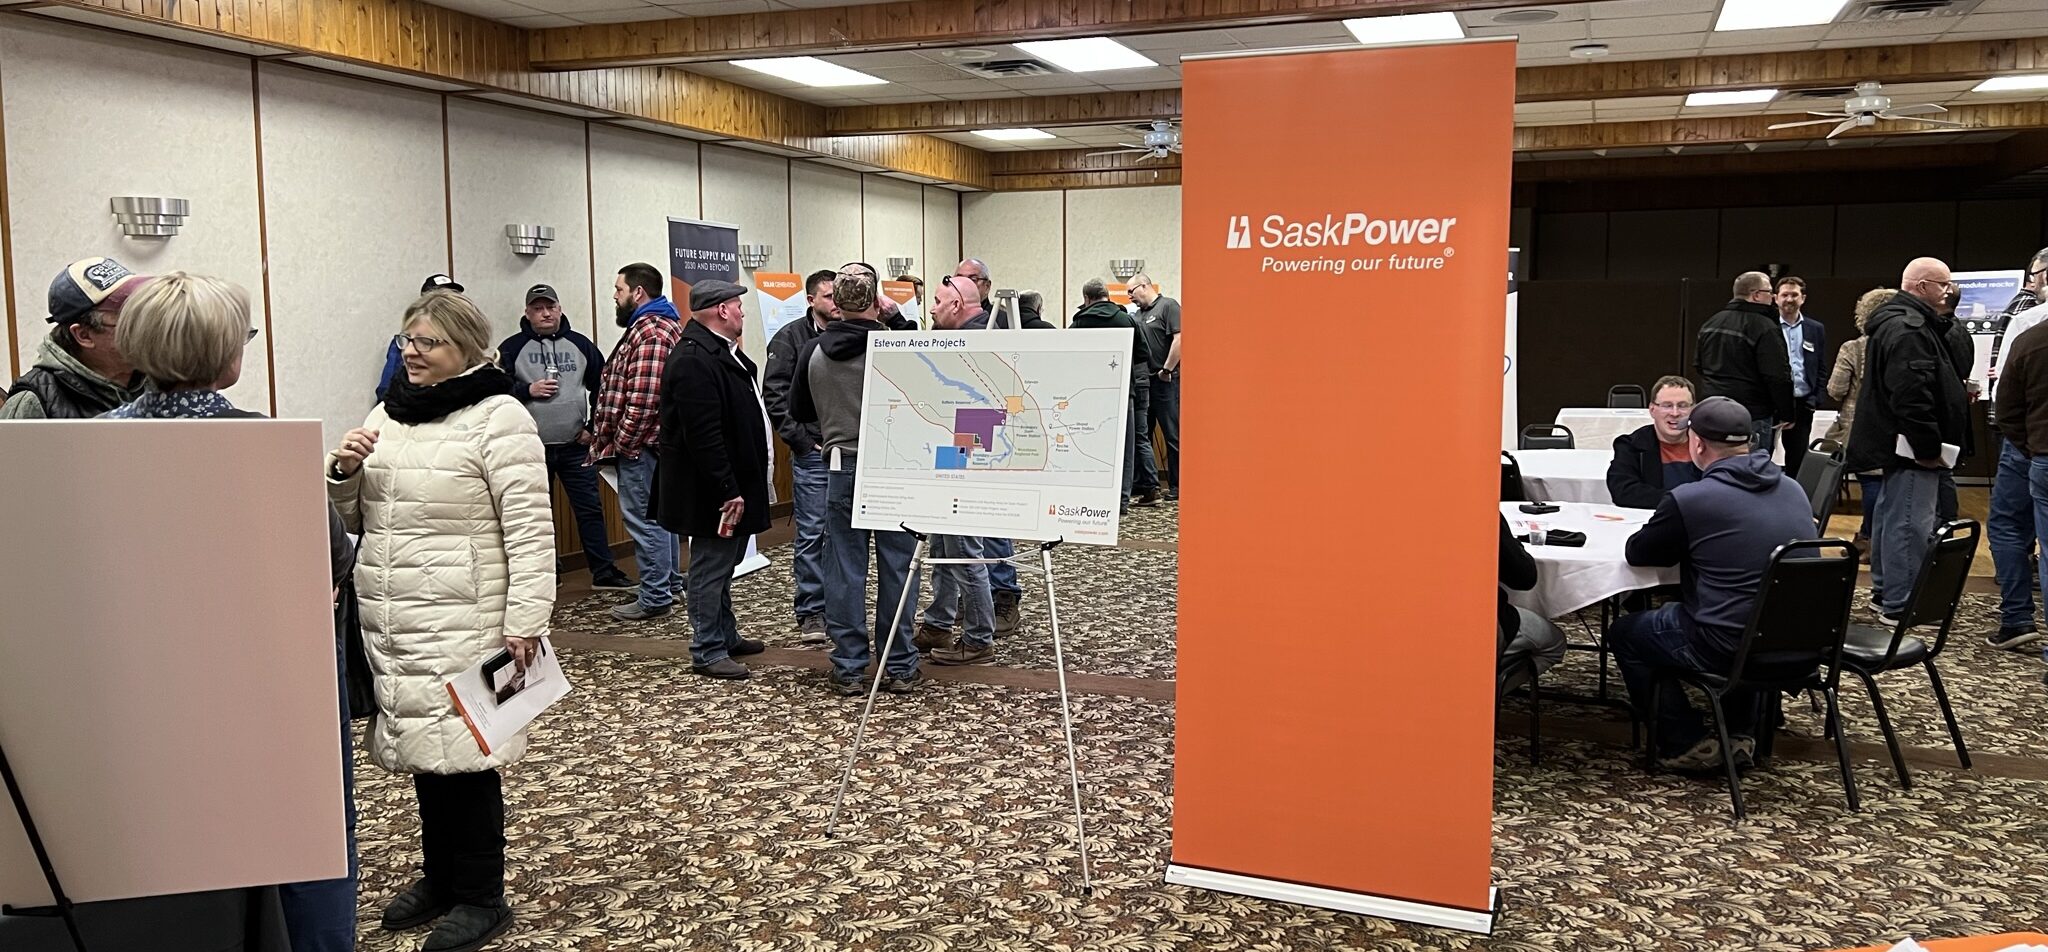 as-saskpower-talks-about-new-solar-nukes-and-a-transmission-line-to